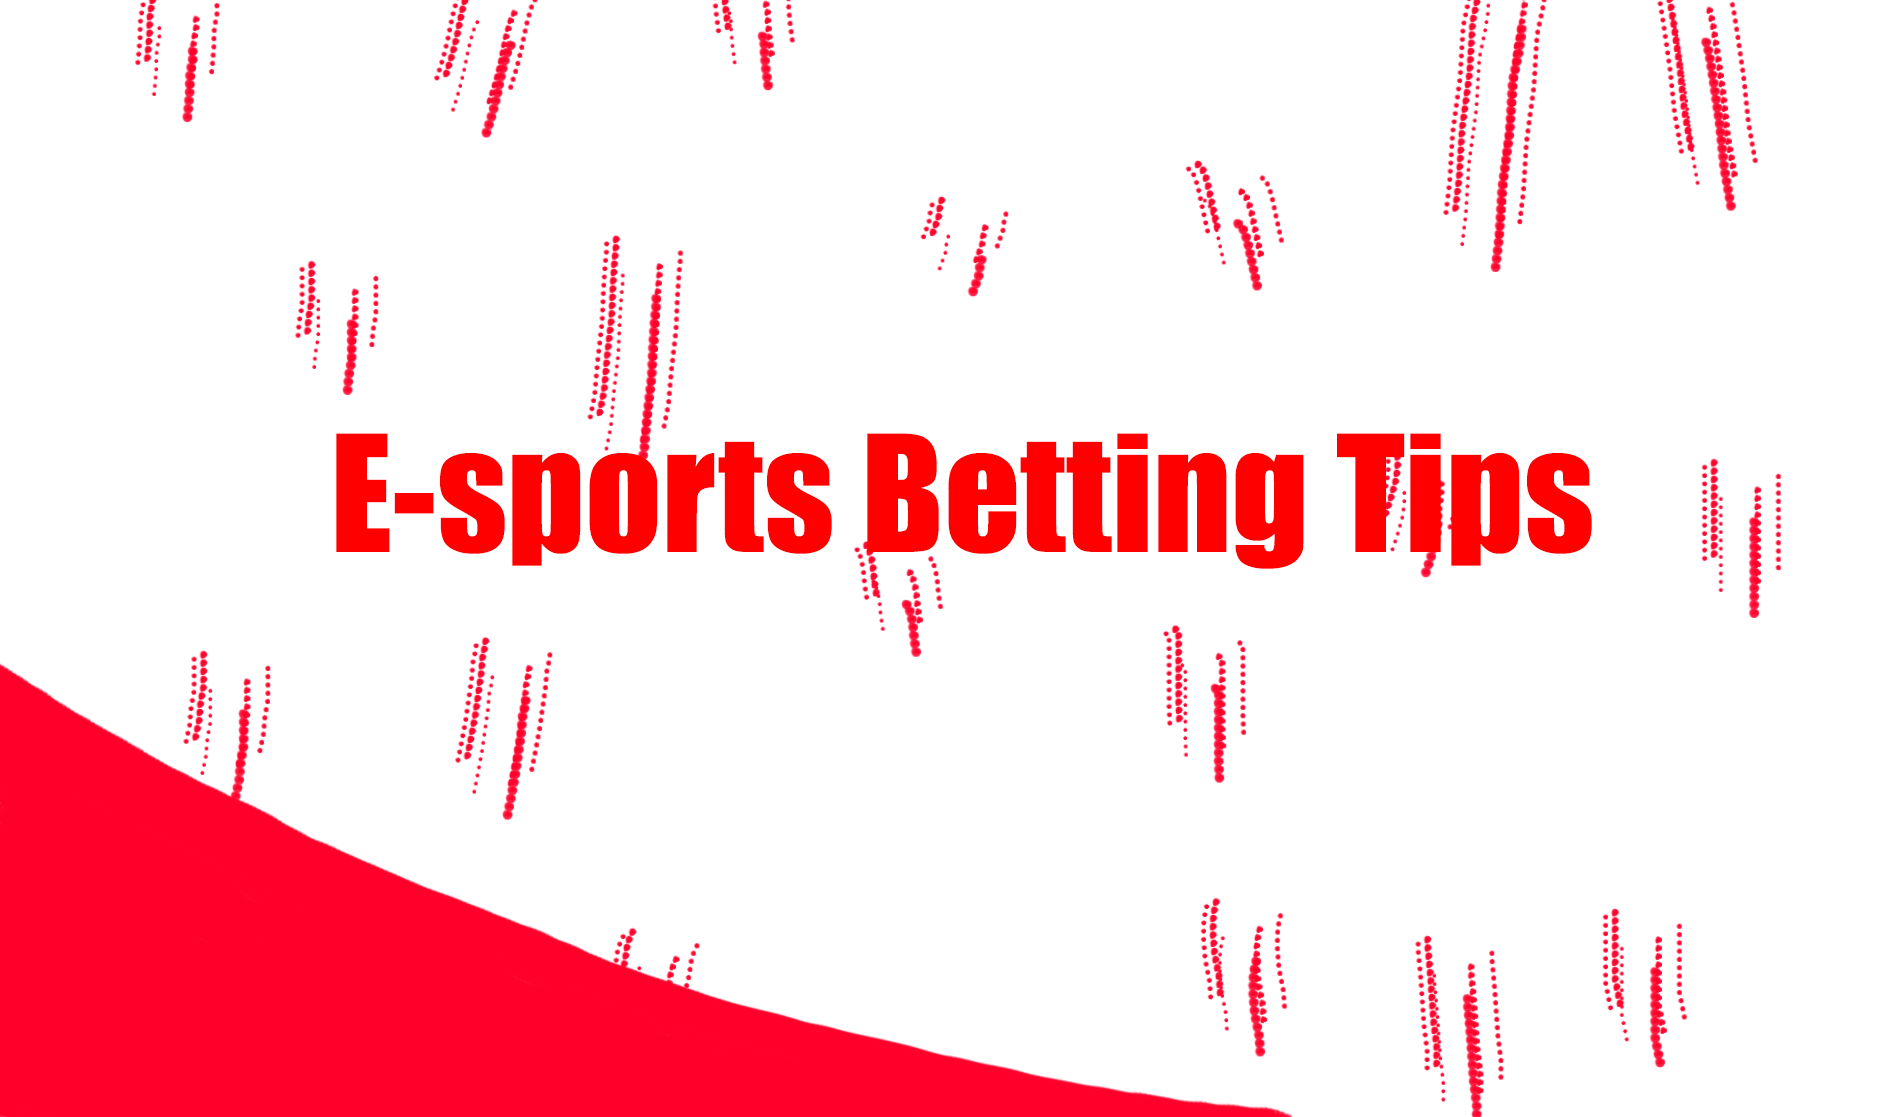 Many e-sports games are available for betting purposes around the world, such as Dota 2, CS: GO, LOL and more